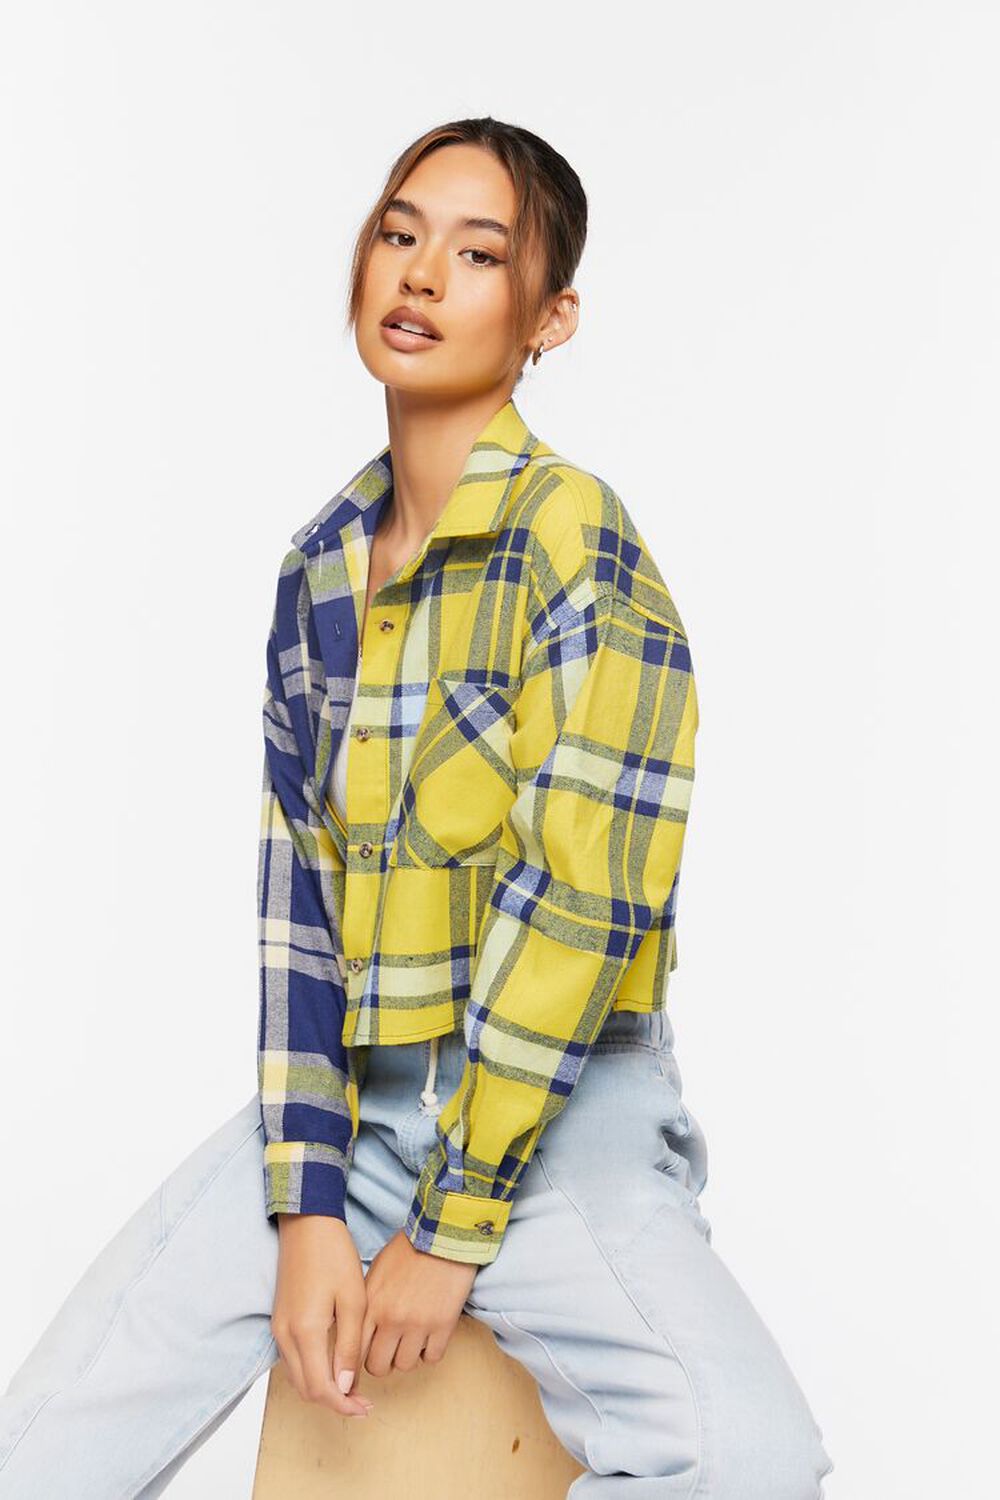 NAVY/GOLD Colorblock Plaid Cropped Shirt, image 1